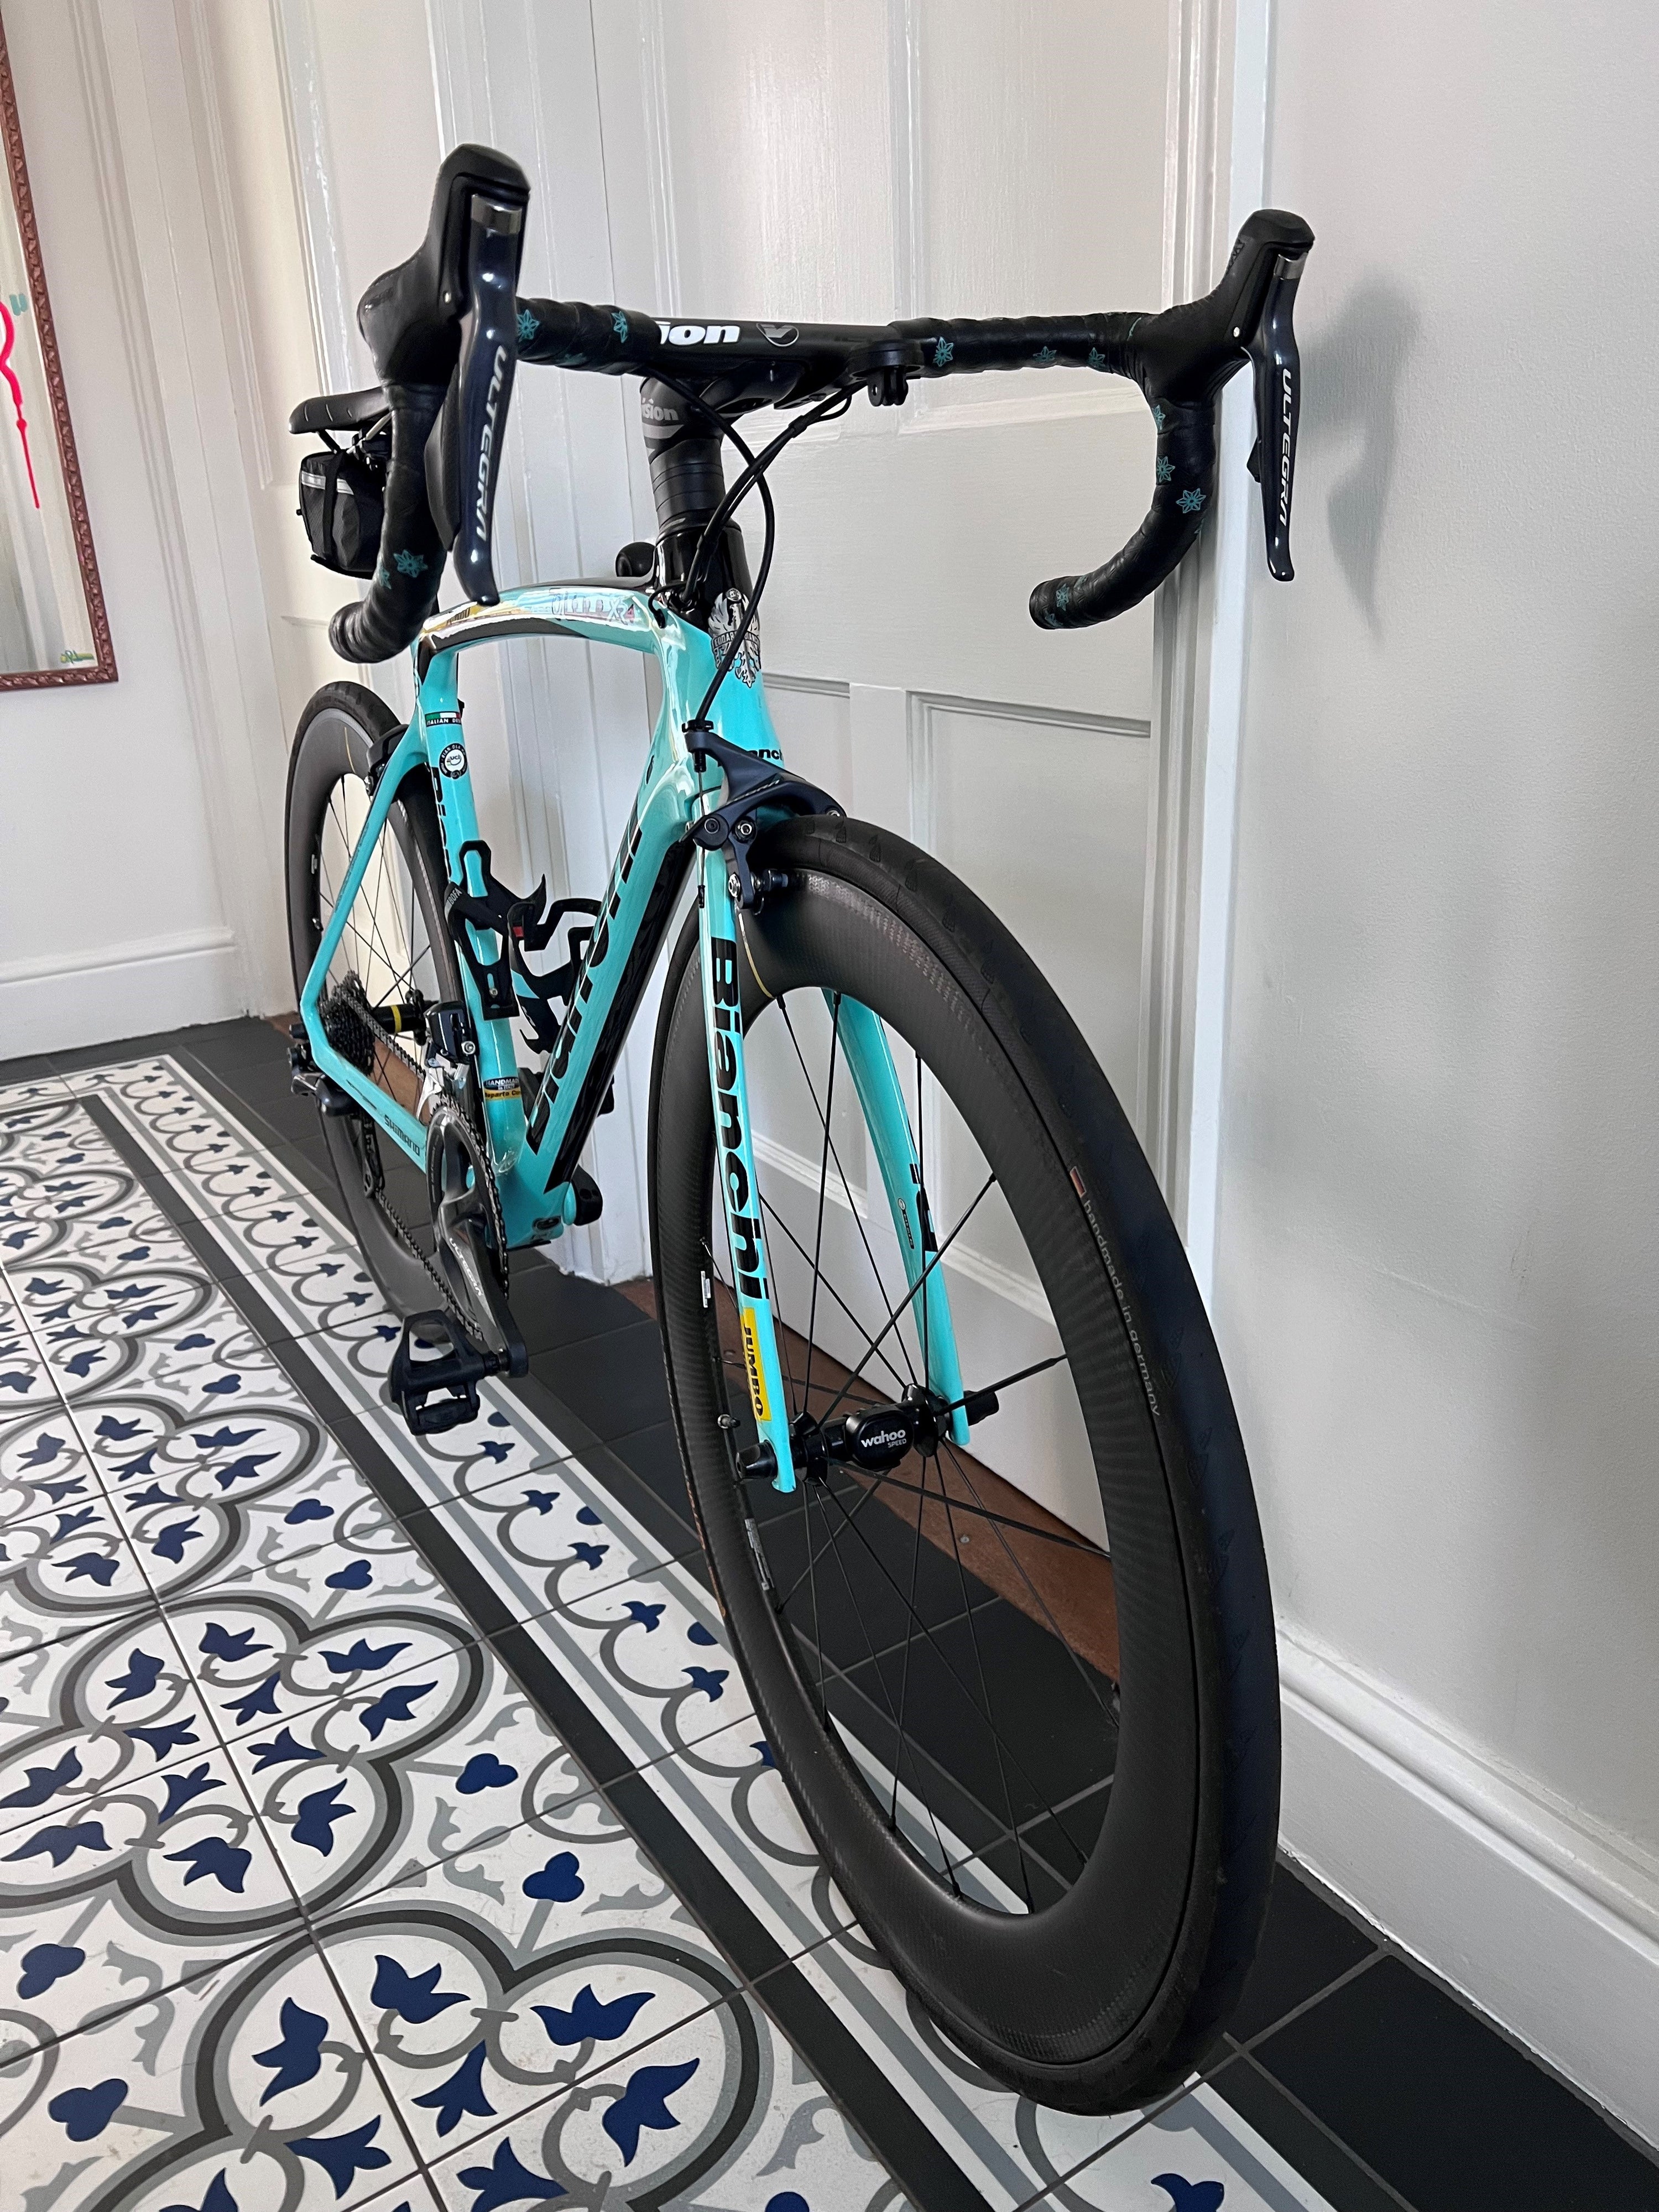 <span style="background-color:rgb(246,247,248);color:rgb(28,30,33);"> Bianchi Oltre XR4 2019 Road bike </span>